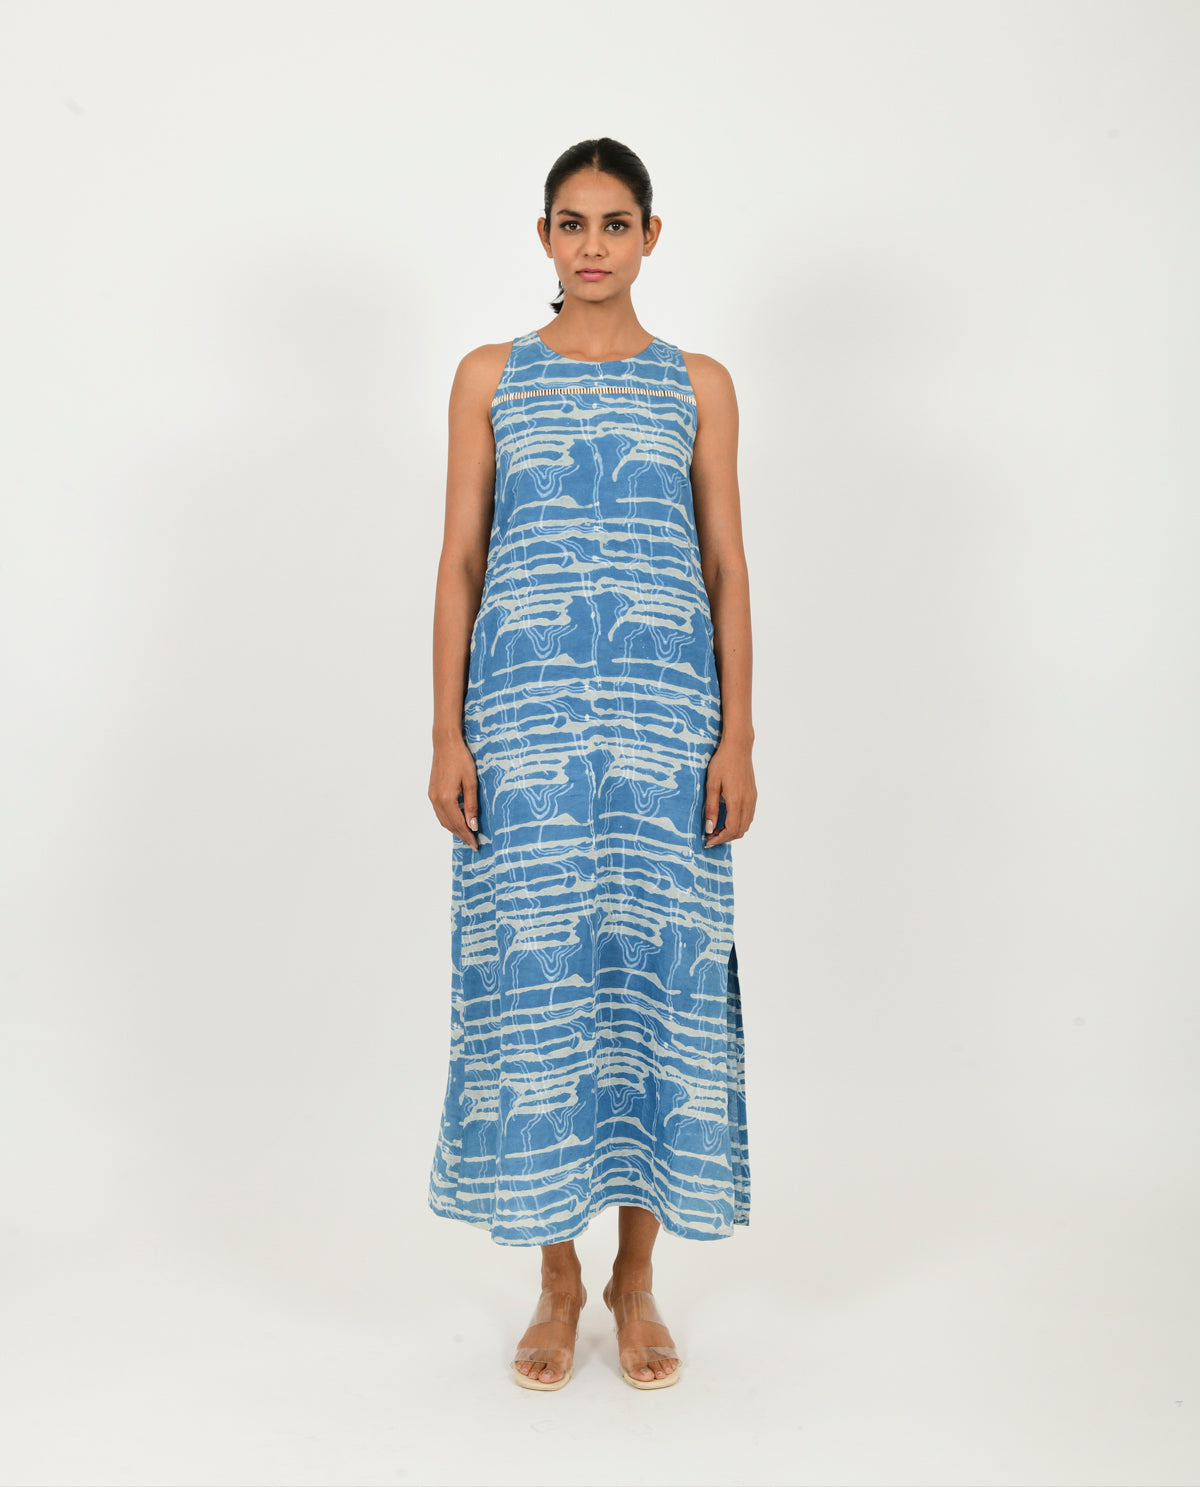 Multicolor Linen Midi Dress at Kamakhyaa by Rias Jaipur. This item is Block Prints, Blue, Casual Wear, Linen Blend, Midi Dresses, Multicolor, Natural, Relaxed Fit, Scribble Prints, White, Womenswear, Yaadein